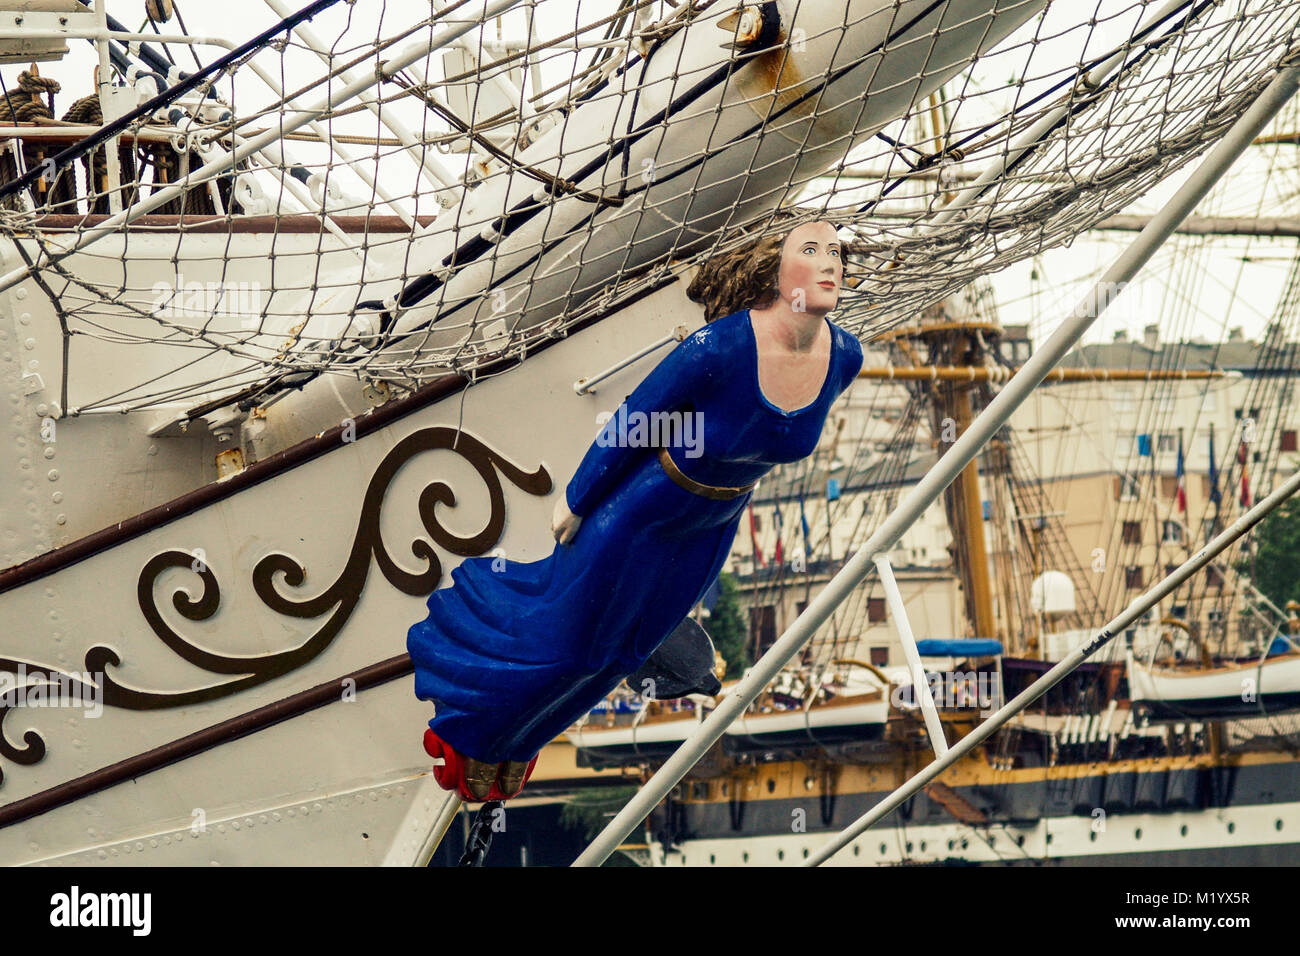 TALL SHIPS BOW - TALL SHIPS FIGUREHEAD -  TALL SHIPS ROUEN FRANCE - FIGURE DE PROUE GRANDS VOILIERS ROUEN FRANCE © Frédéric BEAUMONT Stock Photo